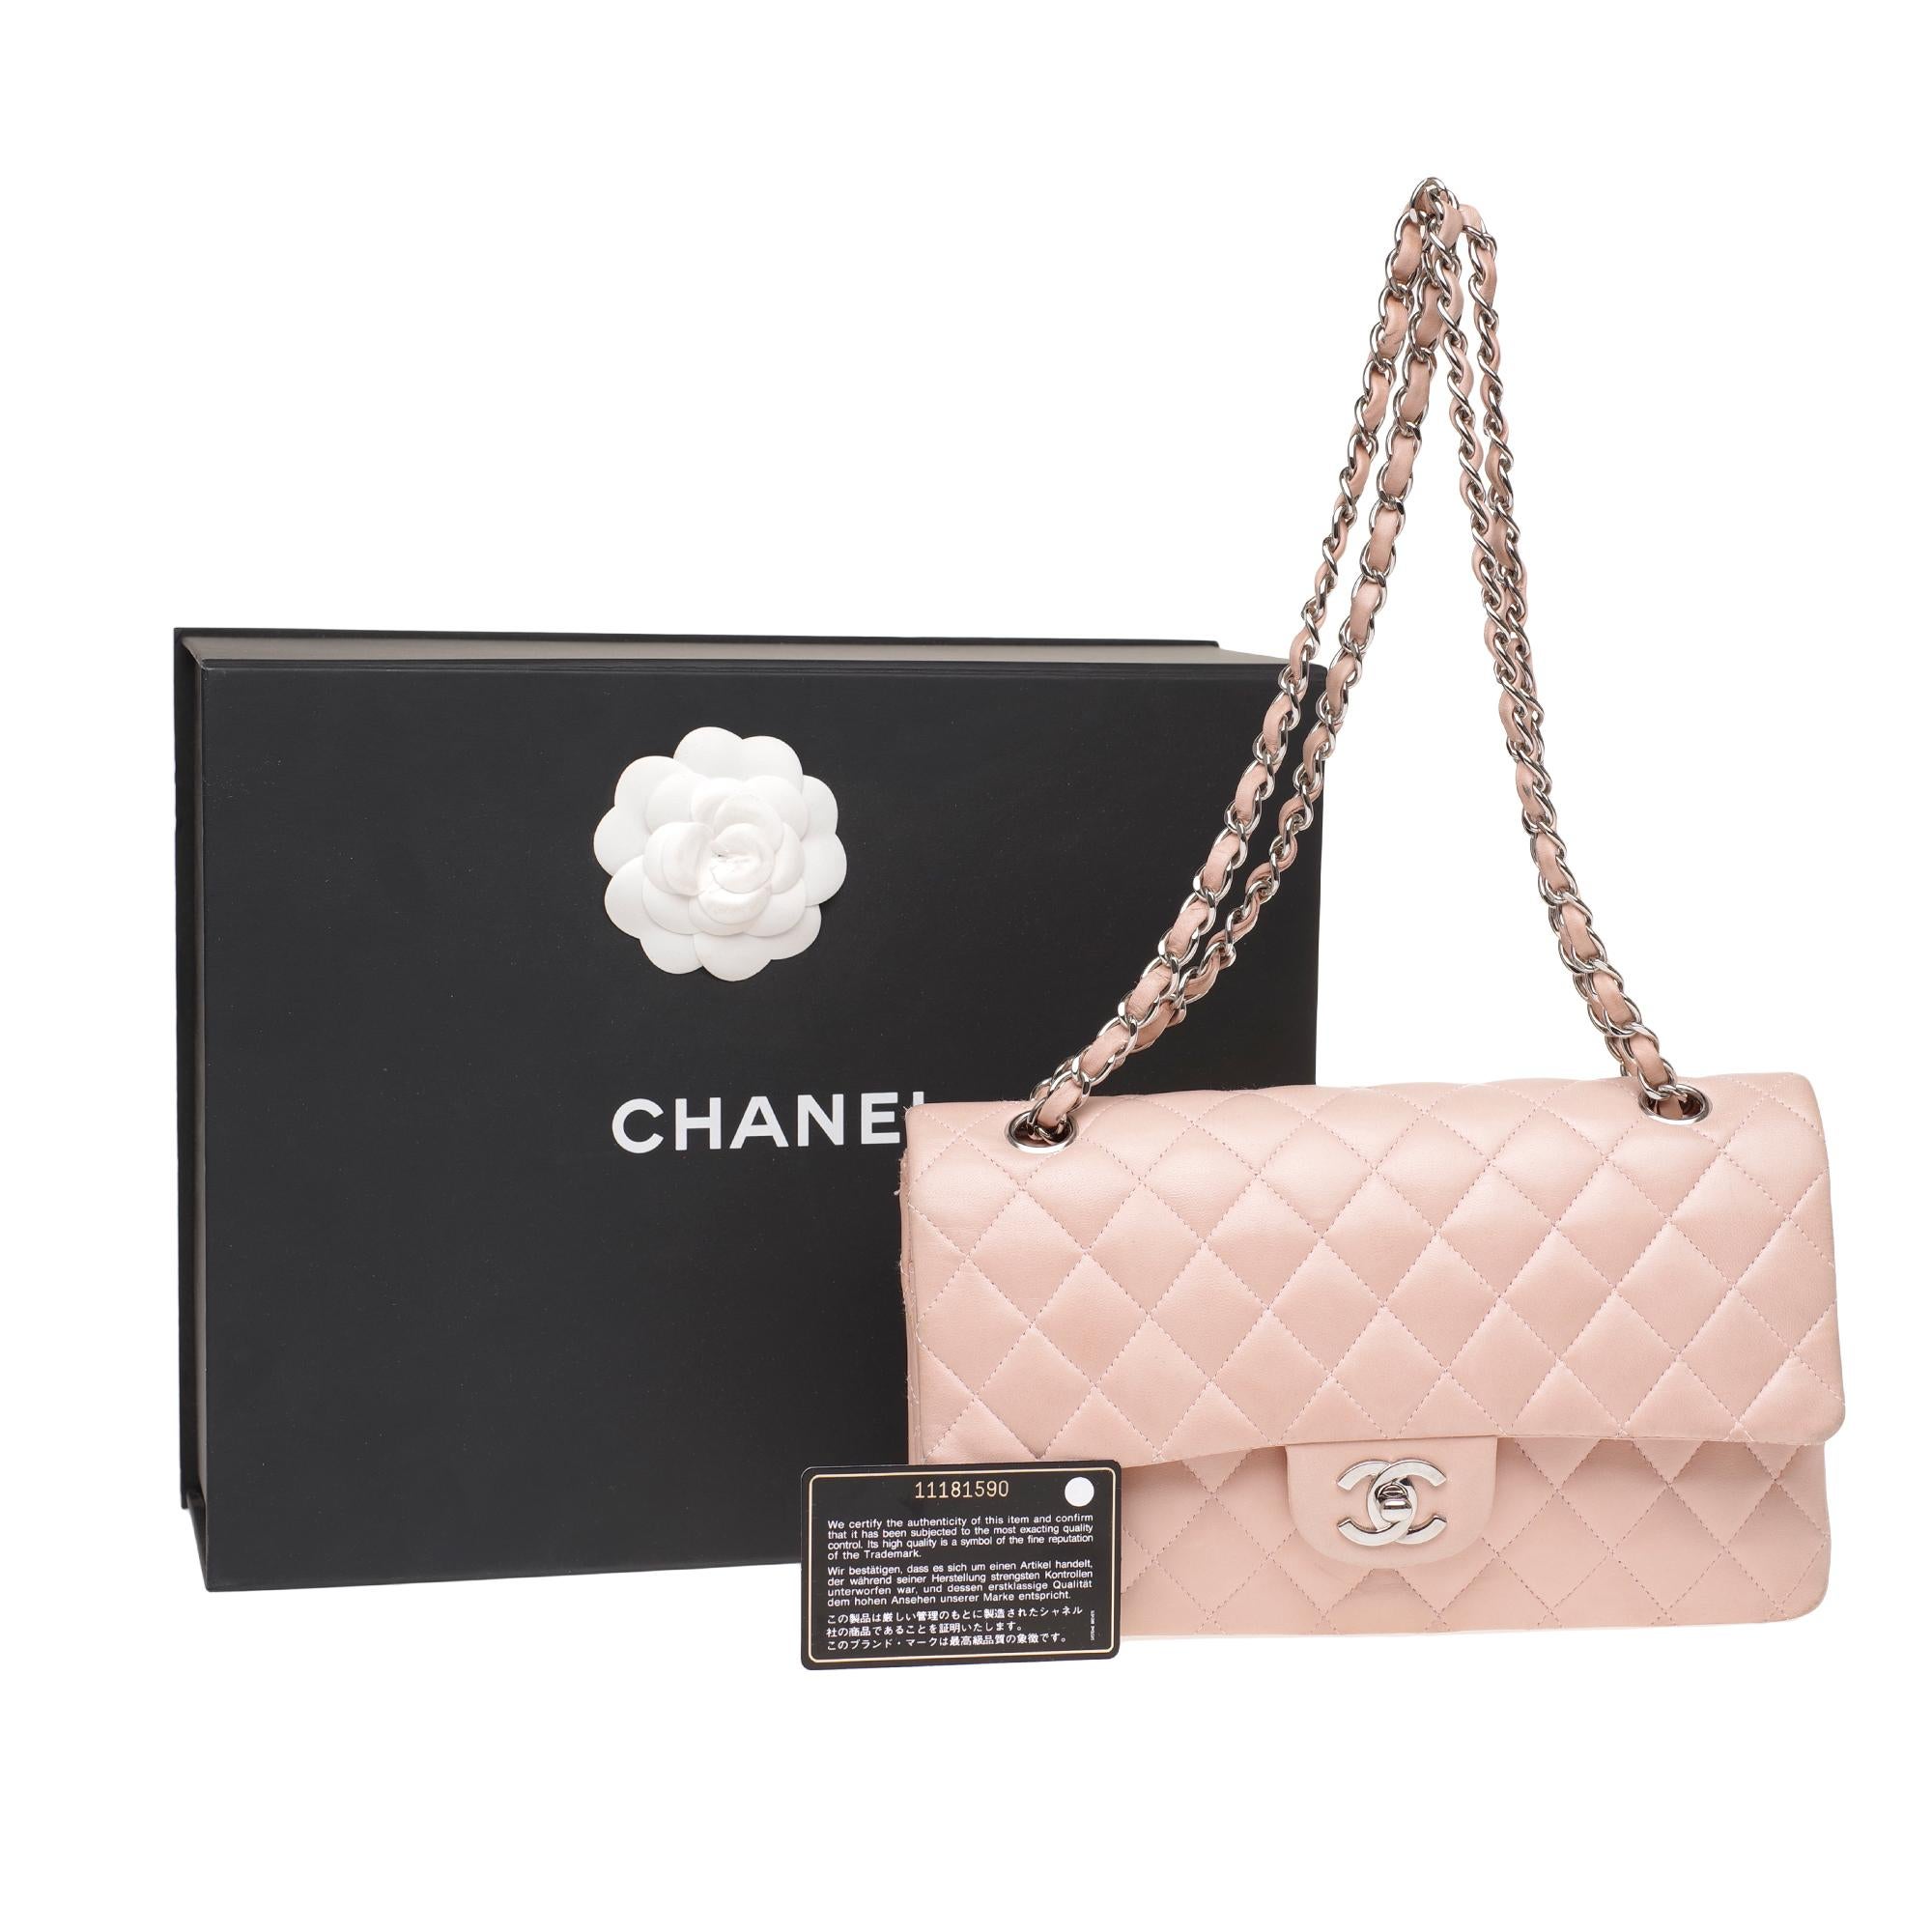 Chanel Timeless medium handbag in pink quilted leather and silver hardware 6